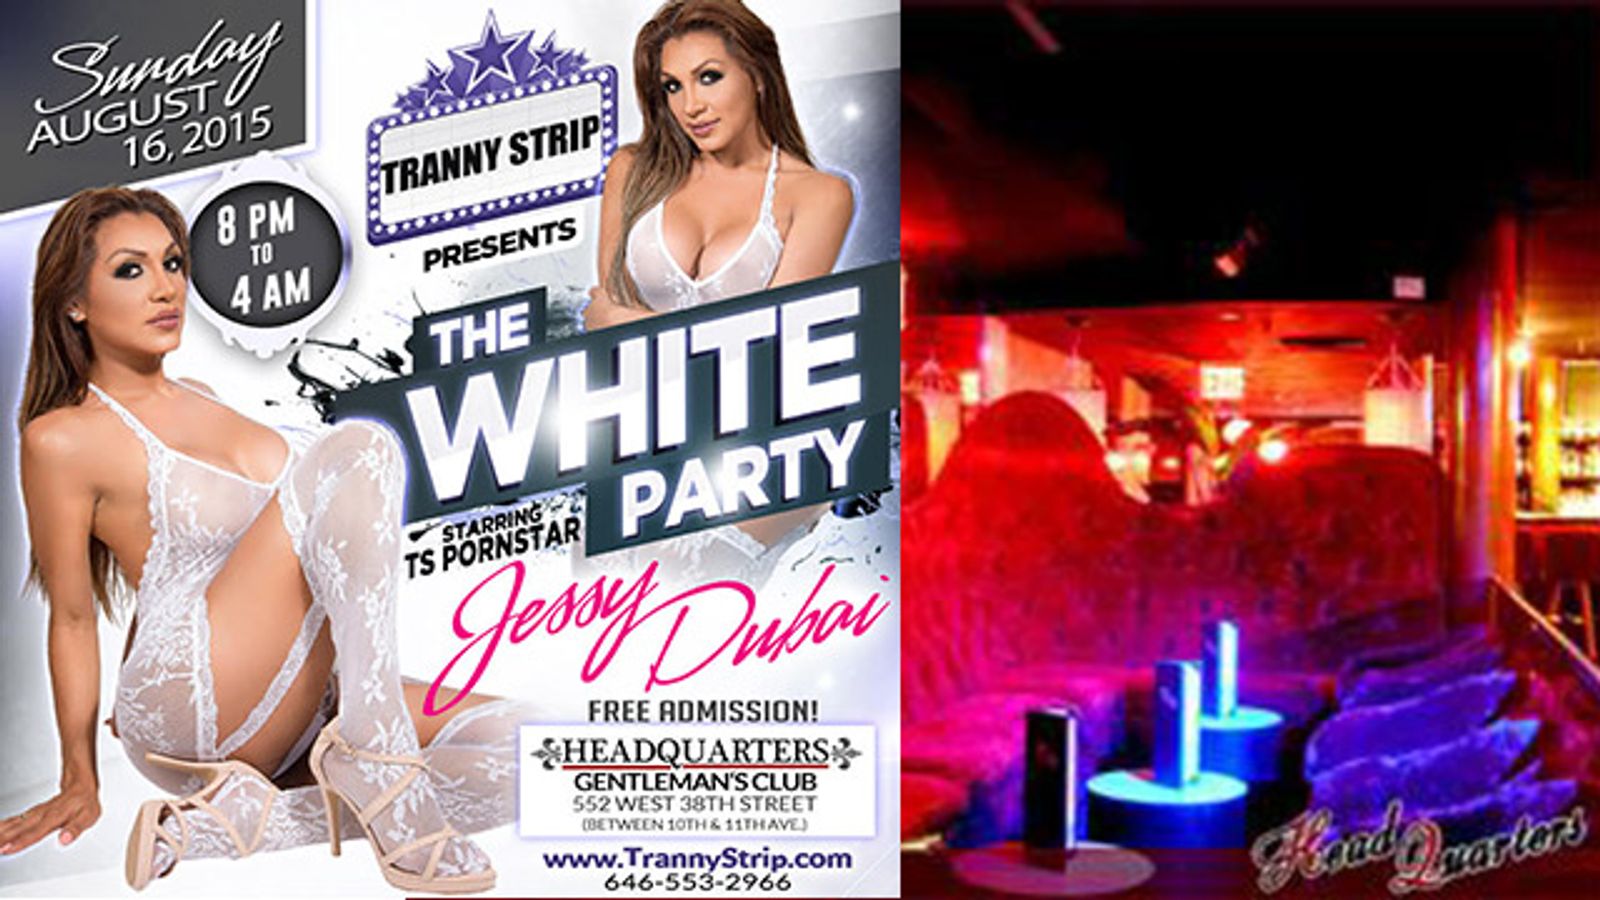 ‘Tranny Strip’ Presents ‘The White Party’ at Headquarters August 16